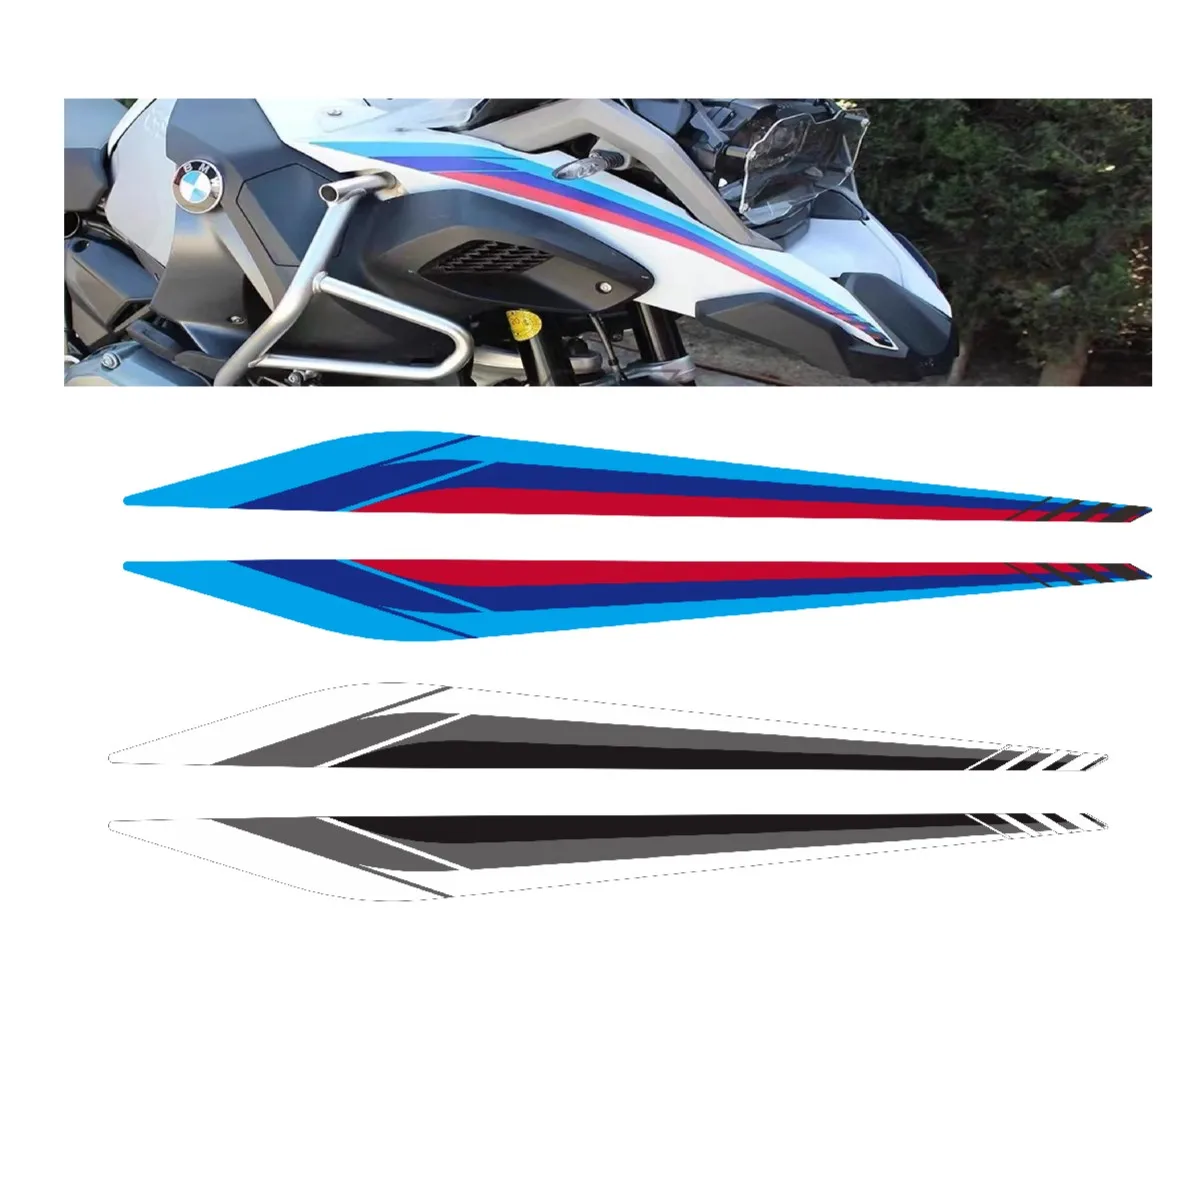 Motorcycle Decoration Decals Kit Case for BMW R1200GS Adventure LC 2014-2018 R1250GS Adv 2019-2020 for bmw r1200gs r1250gs adventure 2004 2020 2005 2006 2007 2008 2009 2010 2011 2014 2019 2018 2016 side case reflective sticker